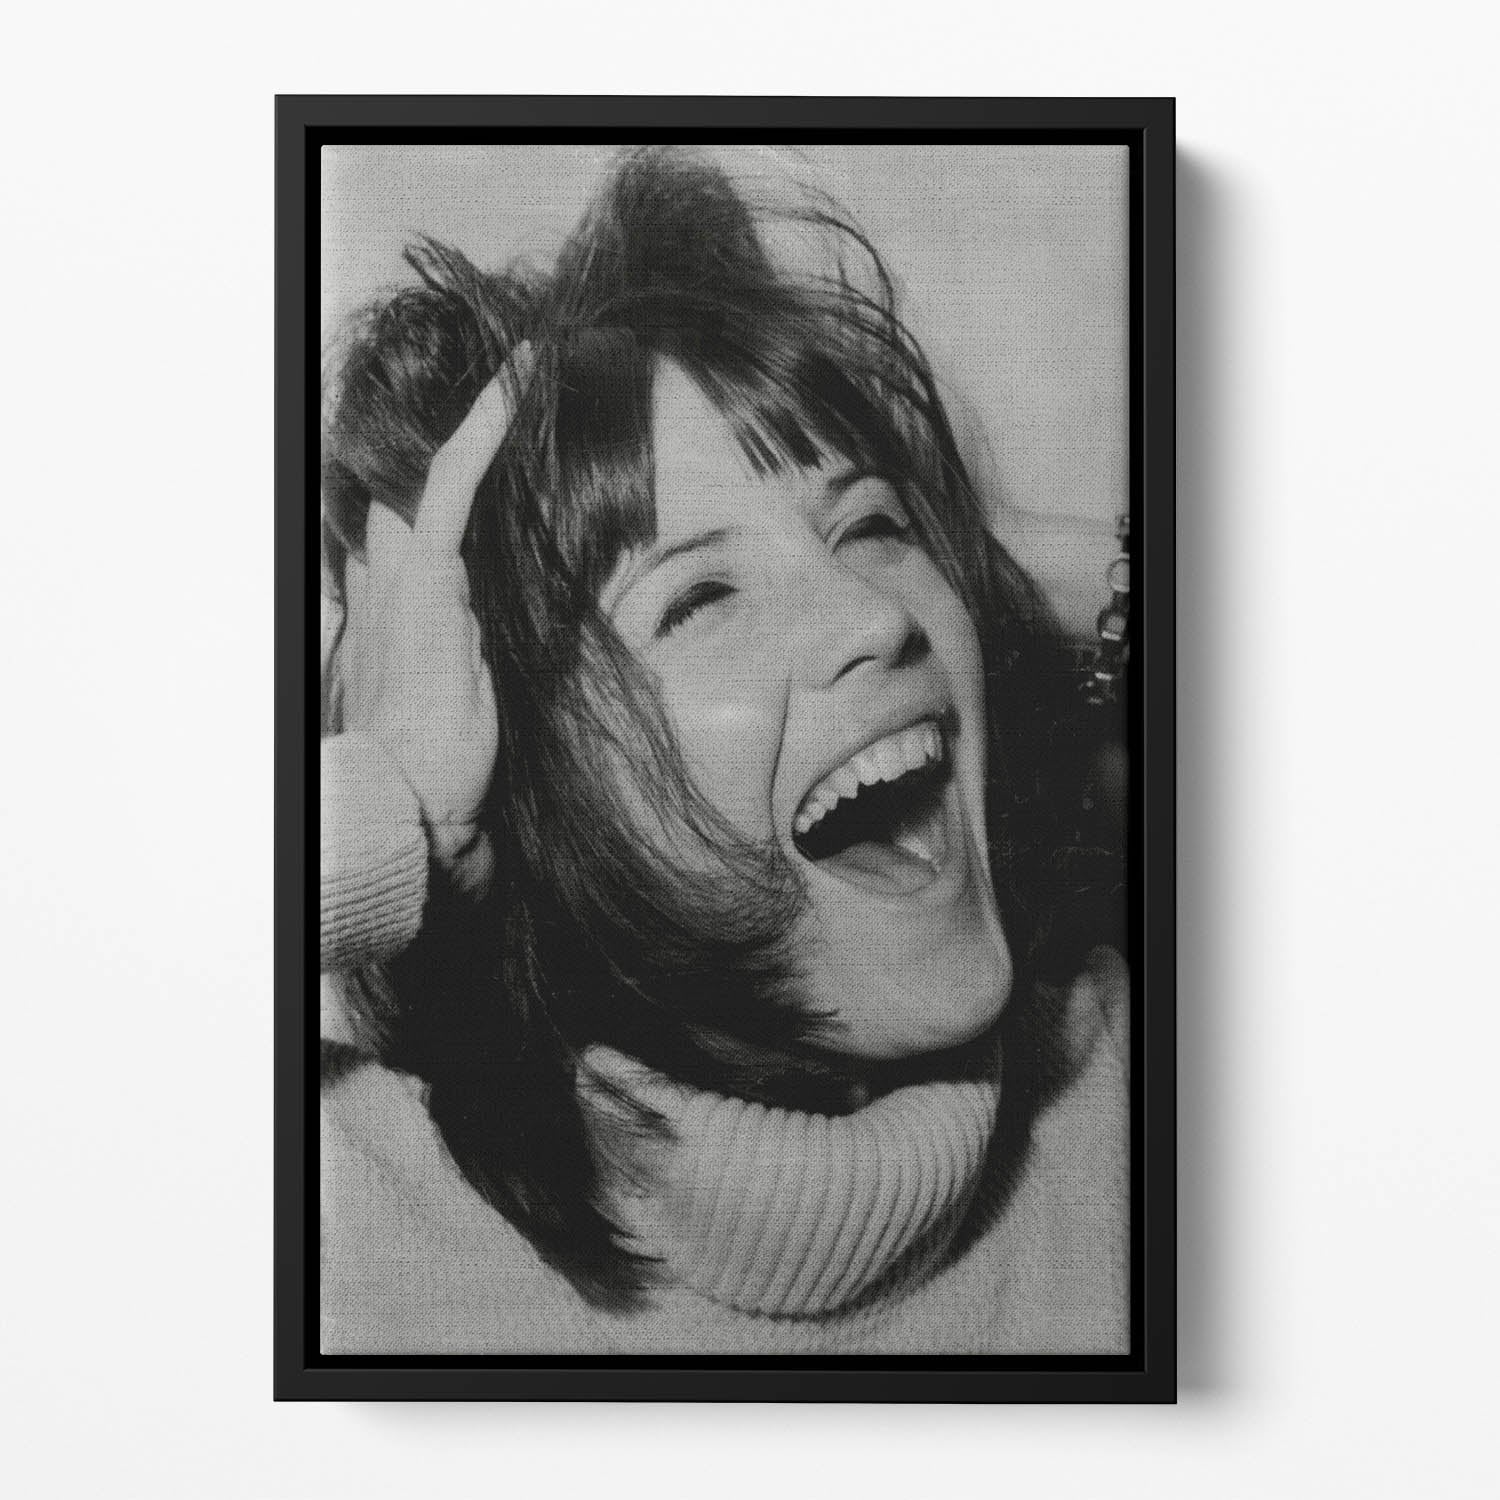 Sandie Shaw laughing Floating Framed Canvas